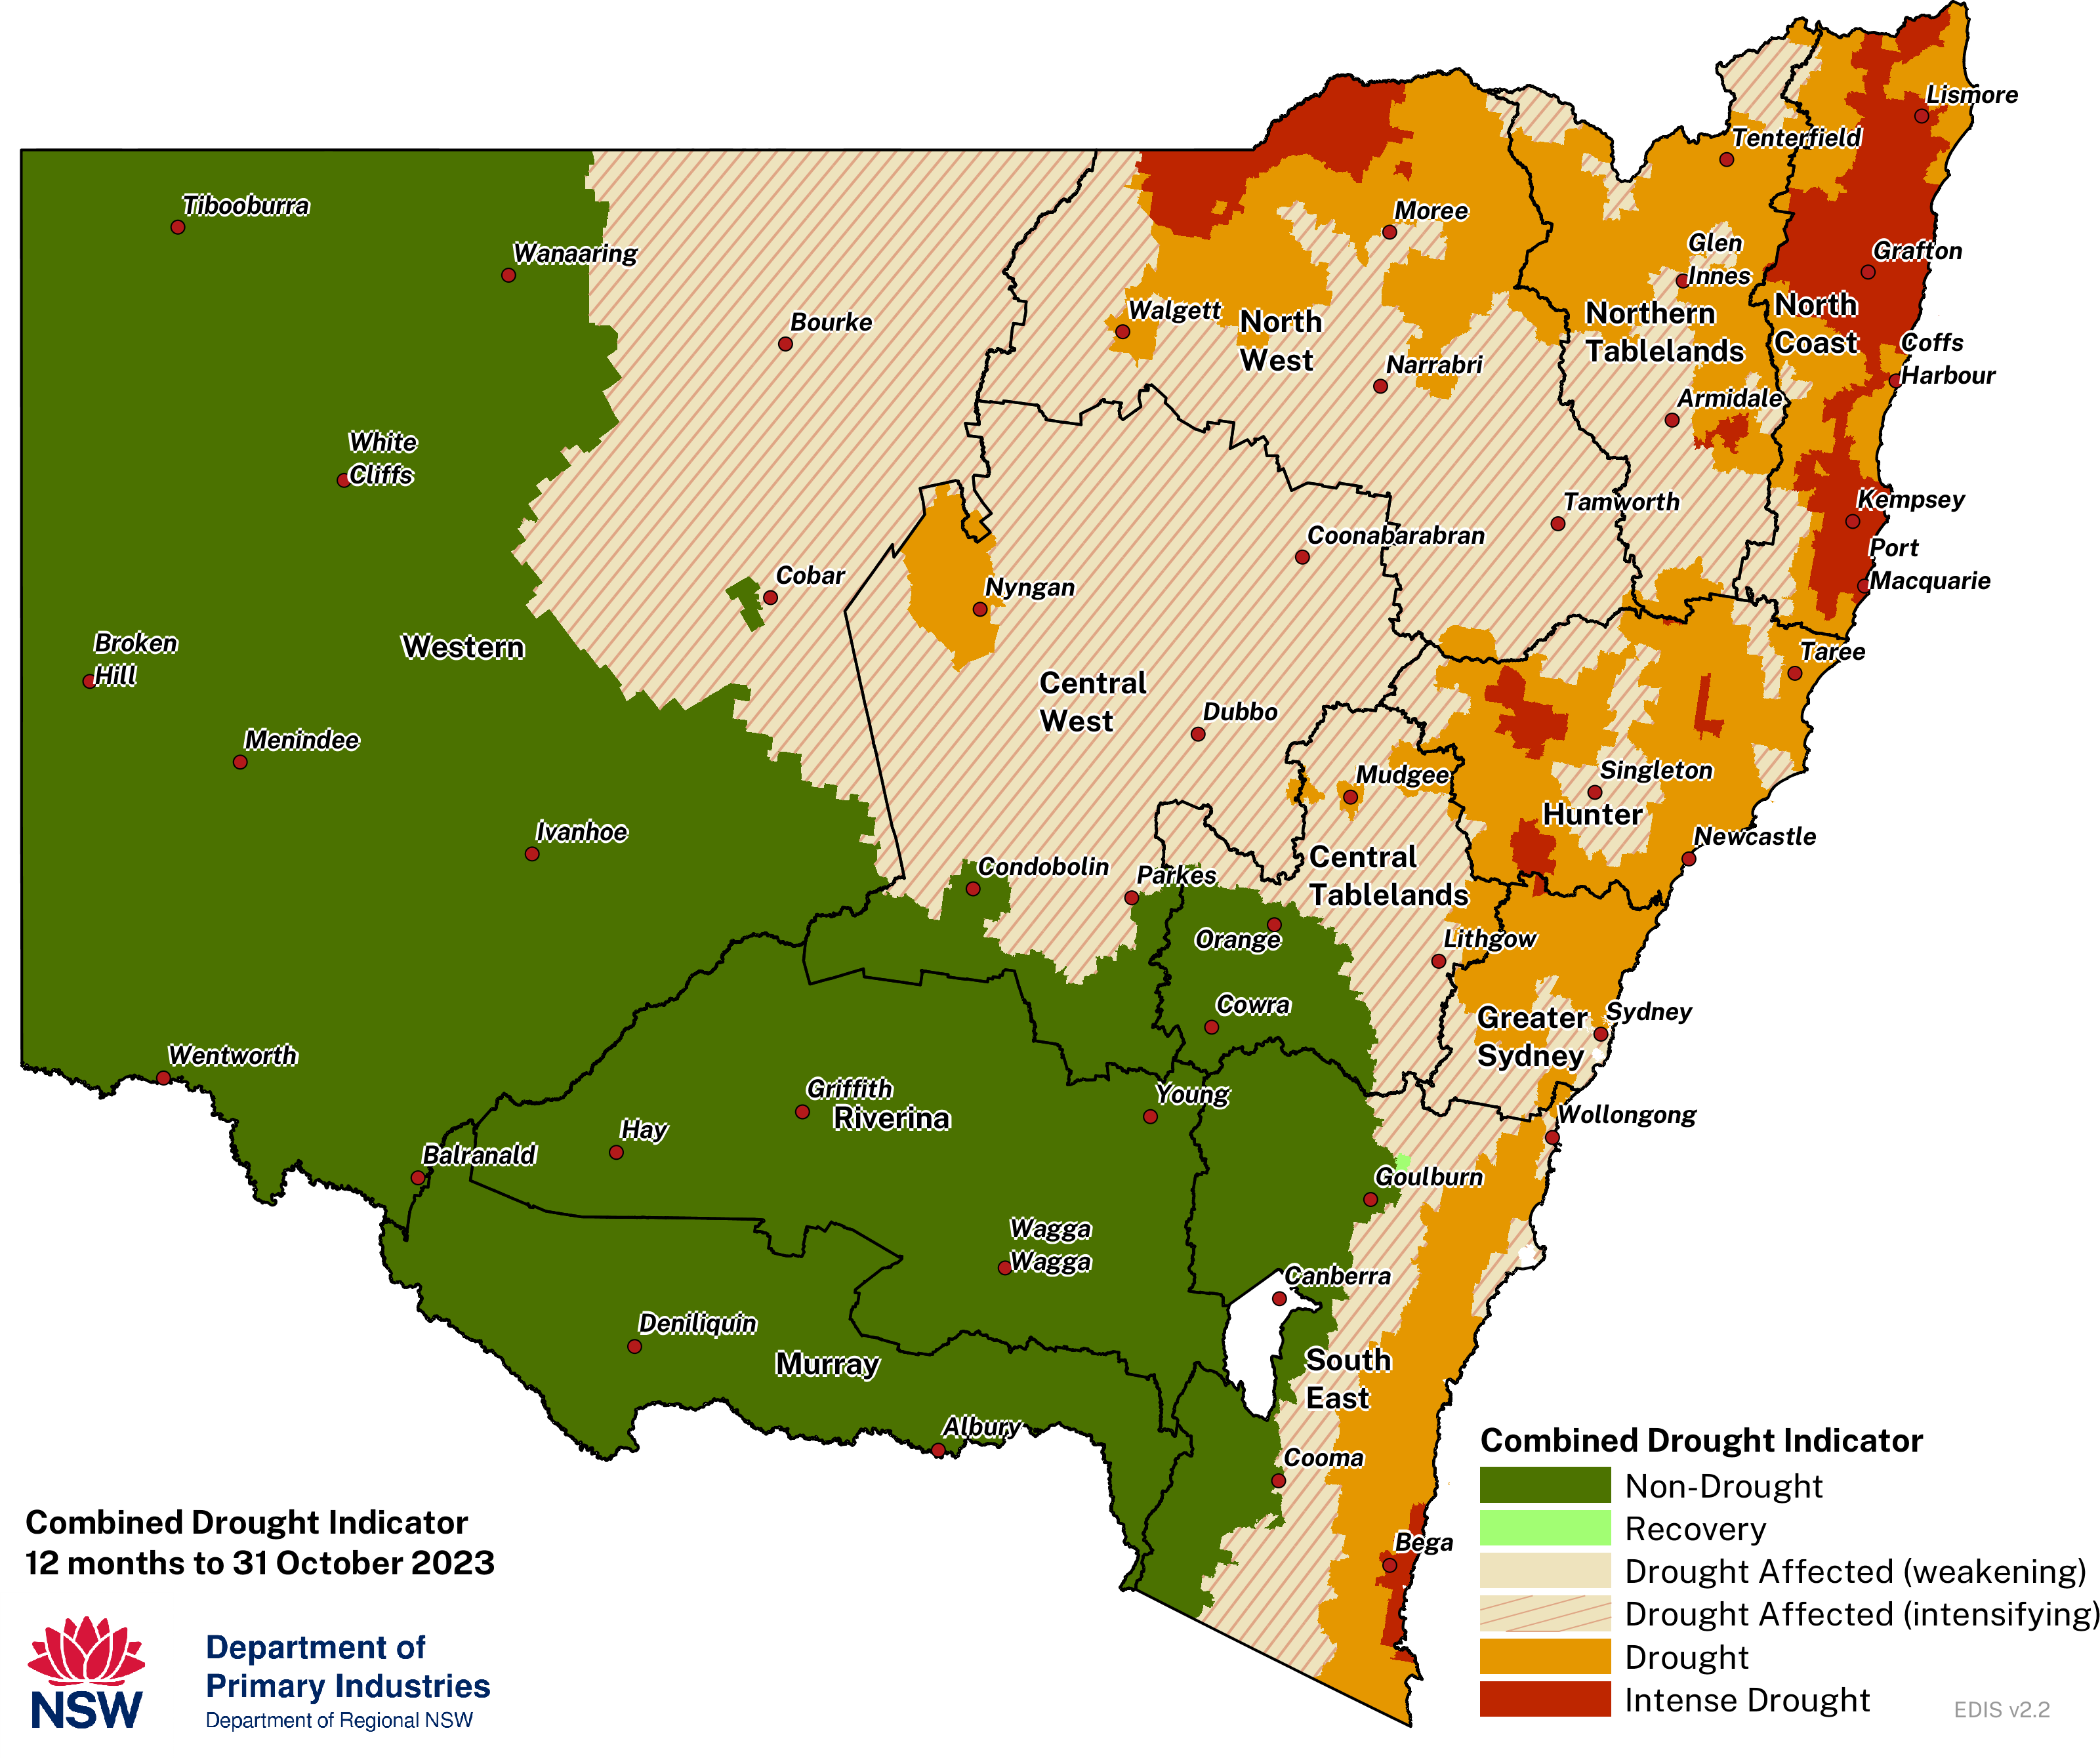 Figure 1. Verified NSW Combined Drought Indicator to 31 October 2023